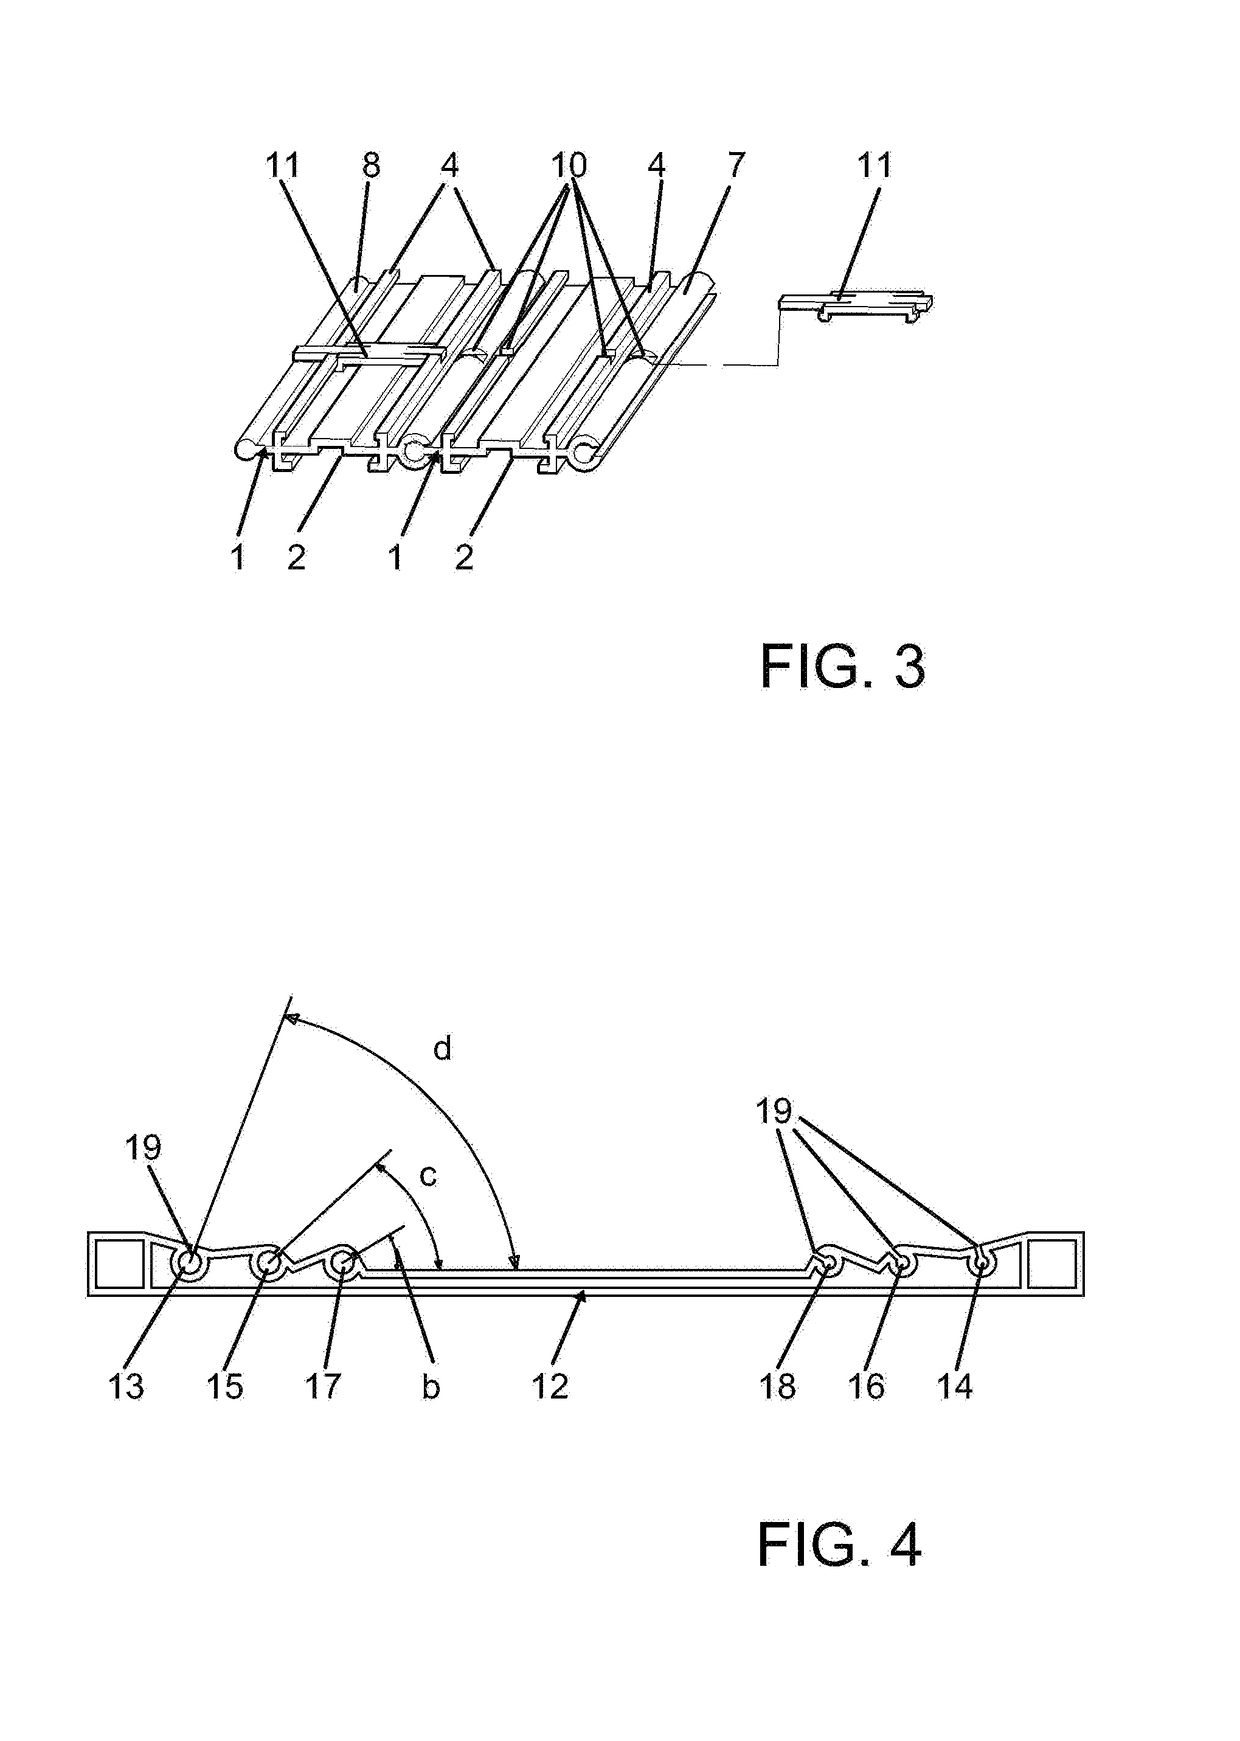 Pyrotechnic carrier structure